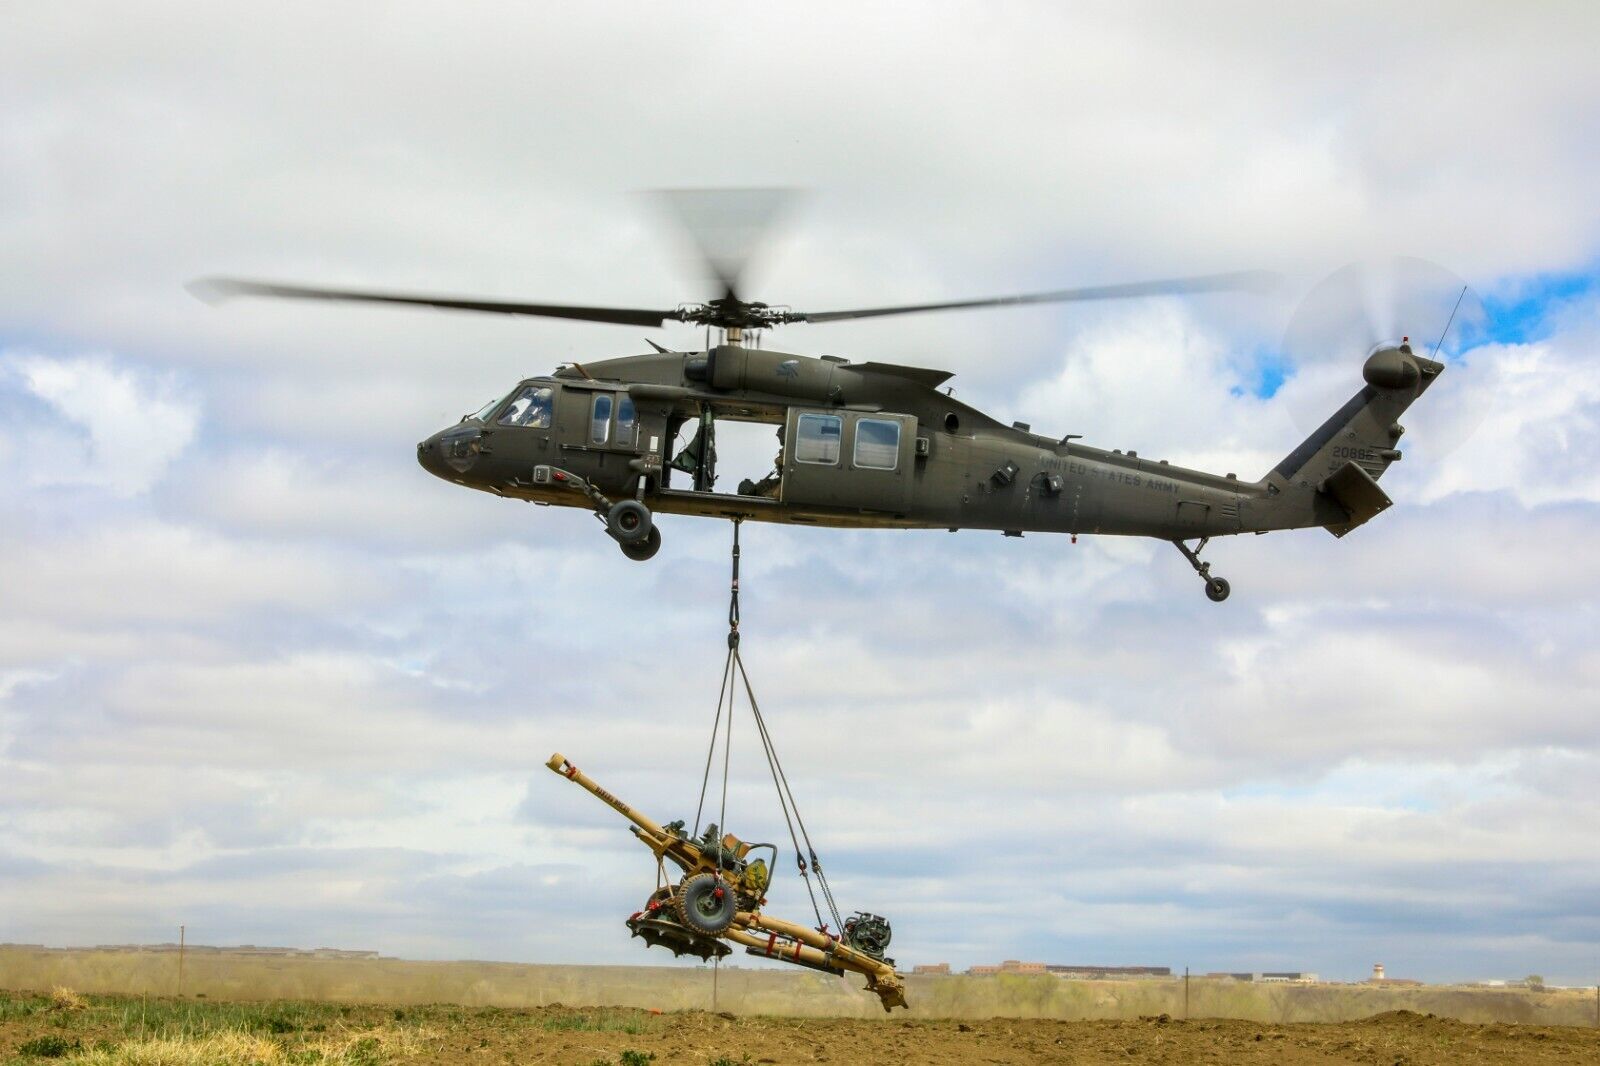 US Army UH-60 Blackhawk helicopter picks up M119 howitzer Photo Print - $8.81 - $14.69